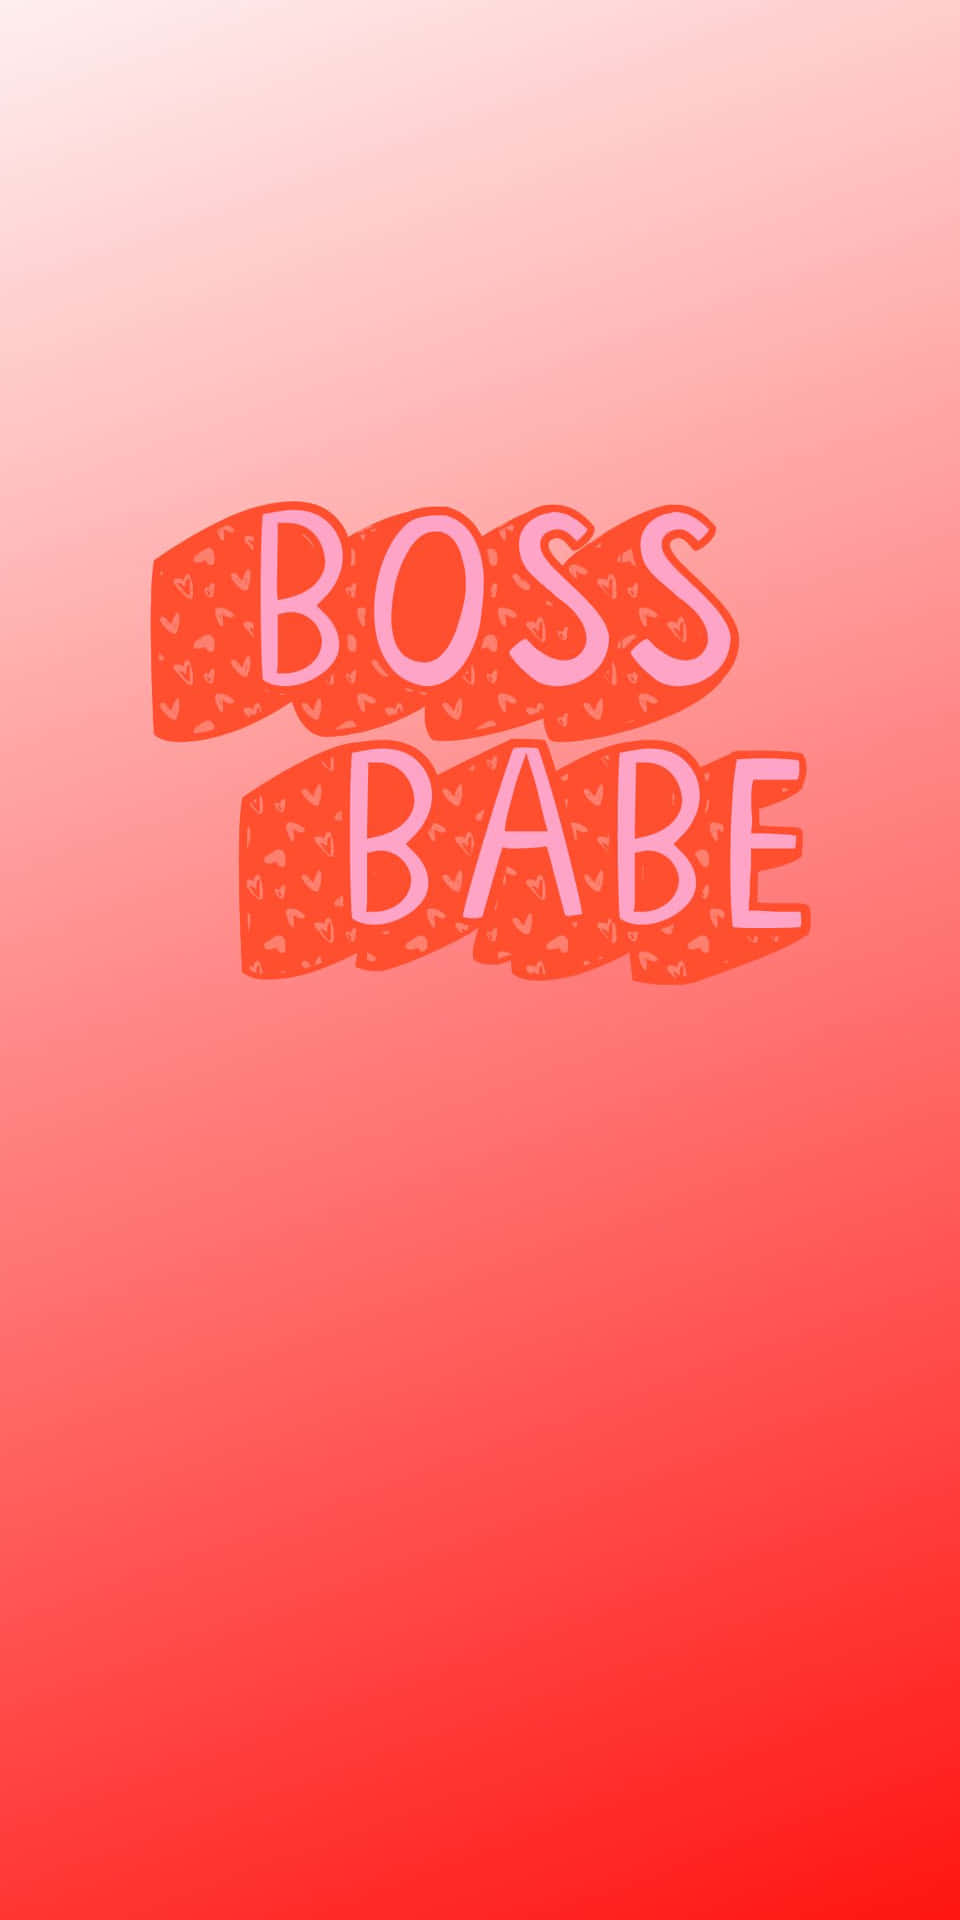 Download Boss Babe Typography Red Gradient Background | Wallpapers.com